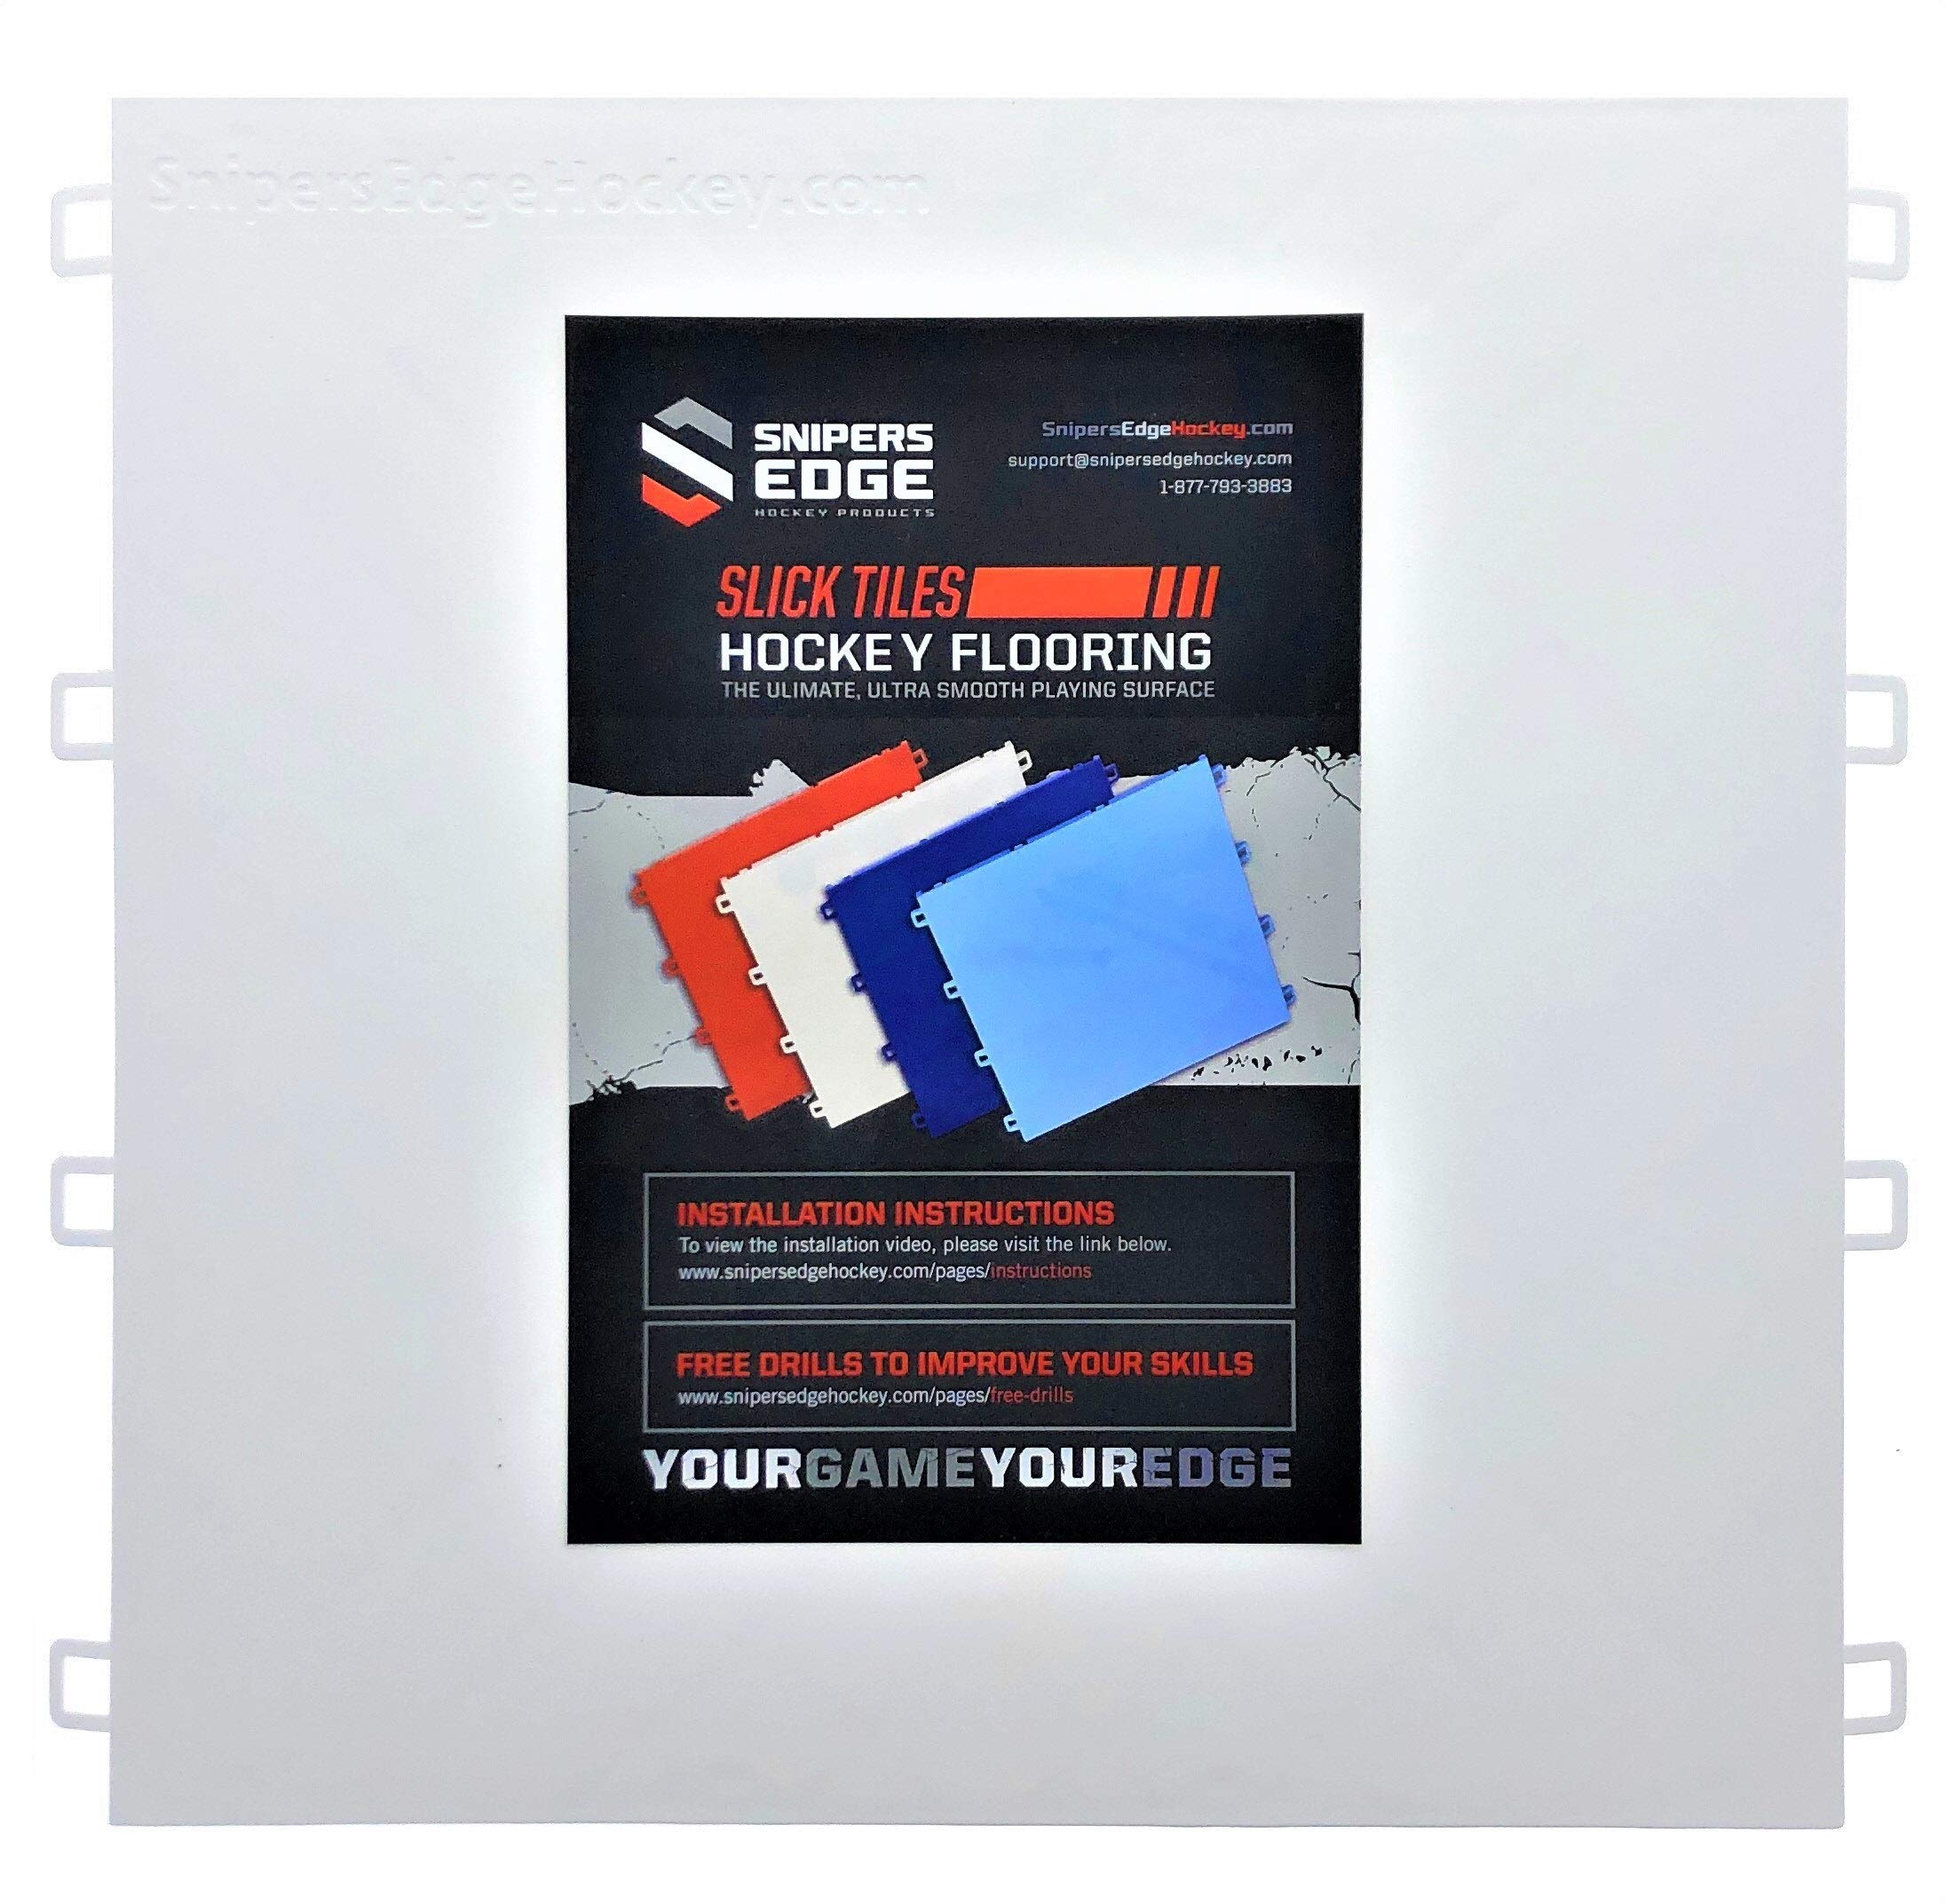 Snipers Edge Hockey - Dryland Slick Tiles - 20 White 12" by 12" Squares - Simulates Real Ice, Easy to Assemble, Premium Grade UV Coating for Protection